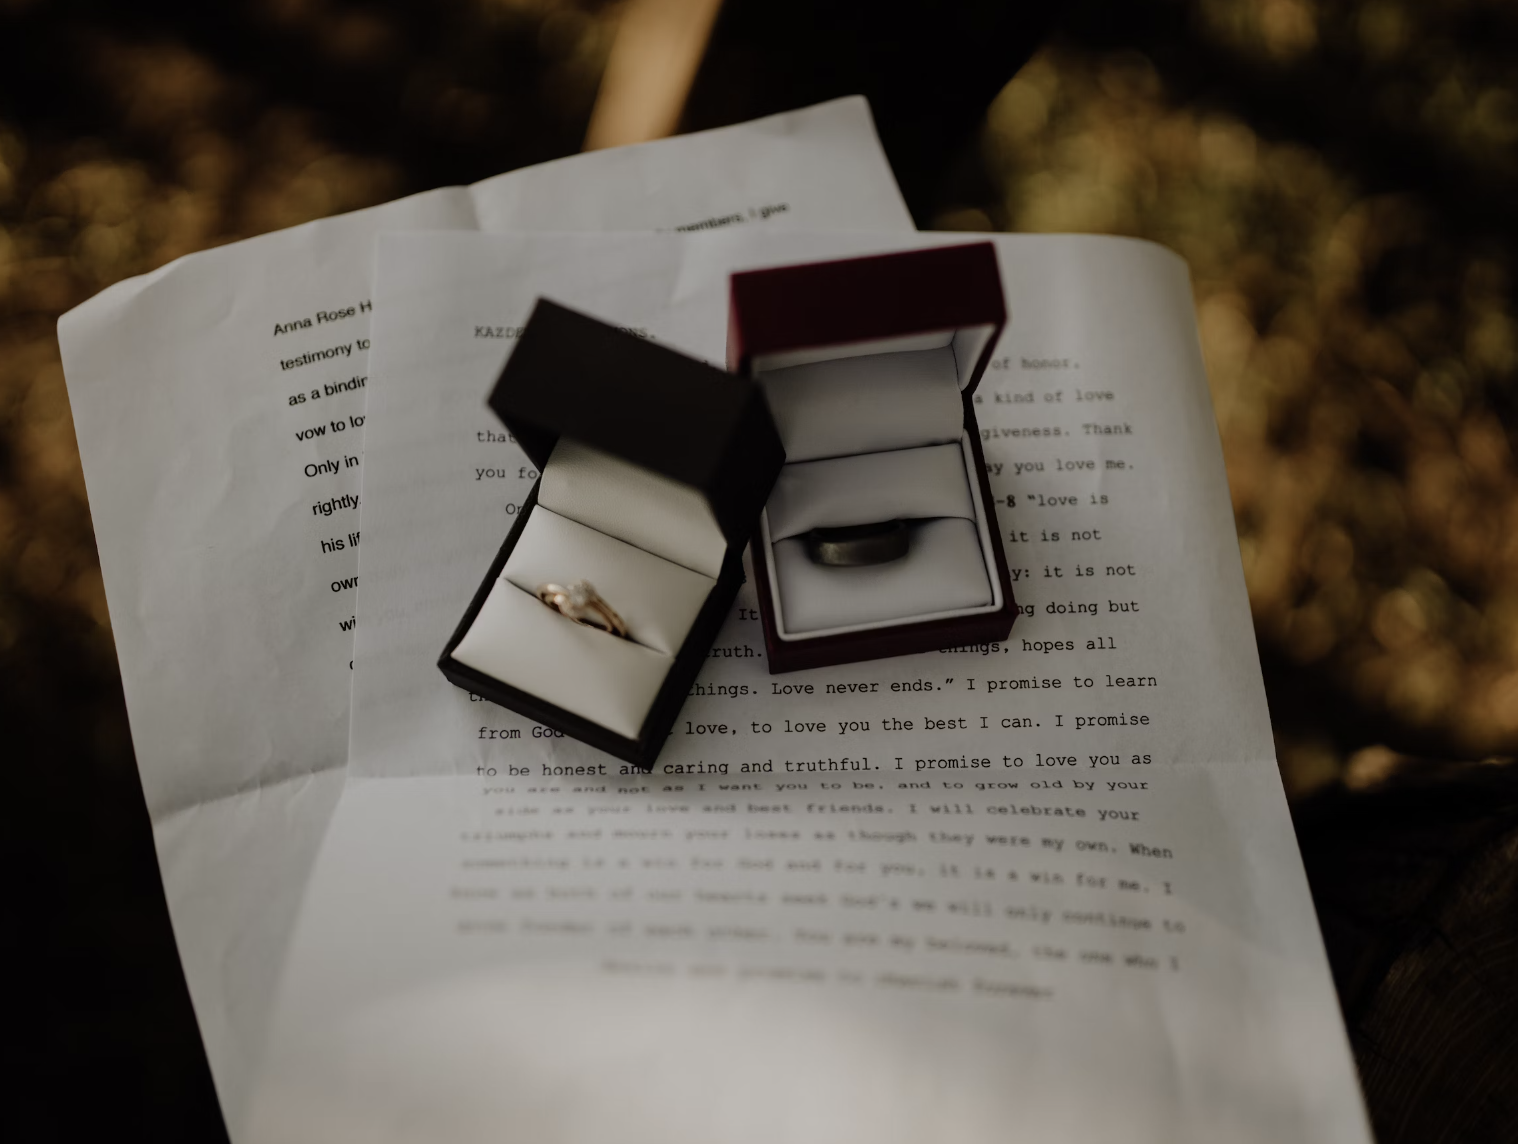 Crafting Wedding Vows From Her to Him: A Heartfelt Guide